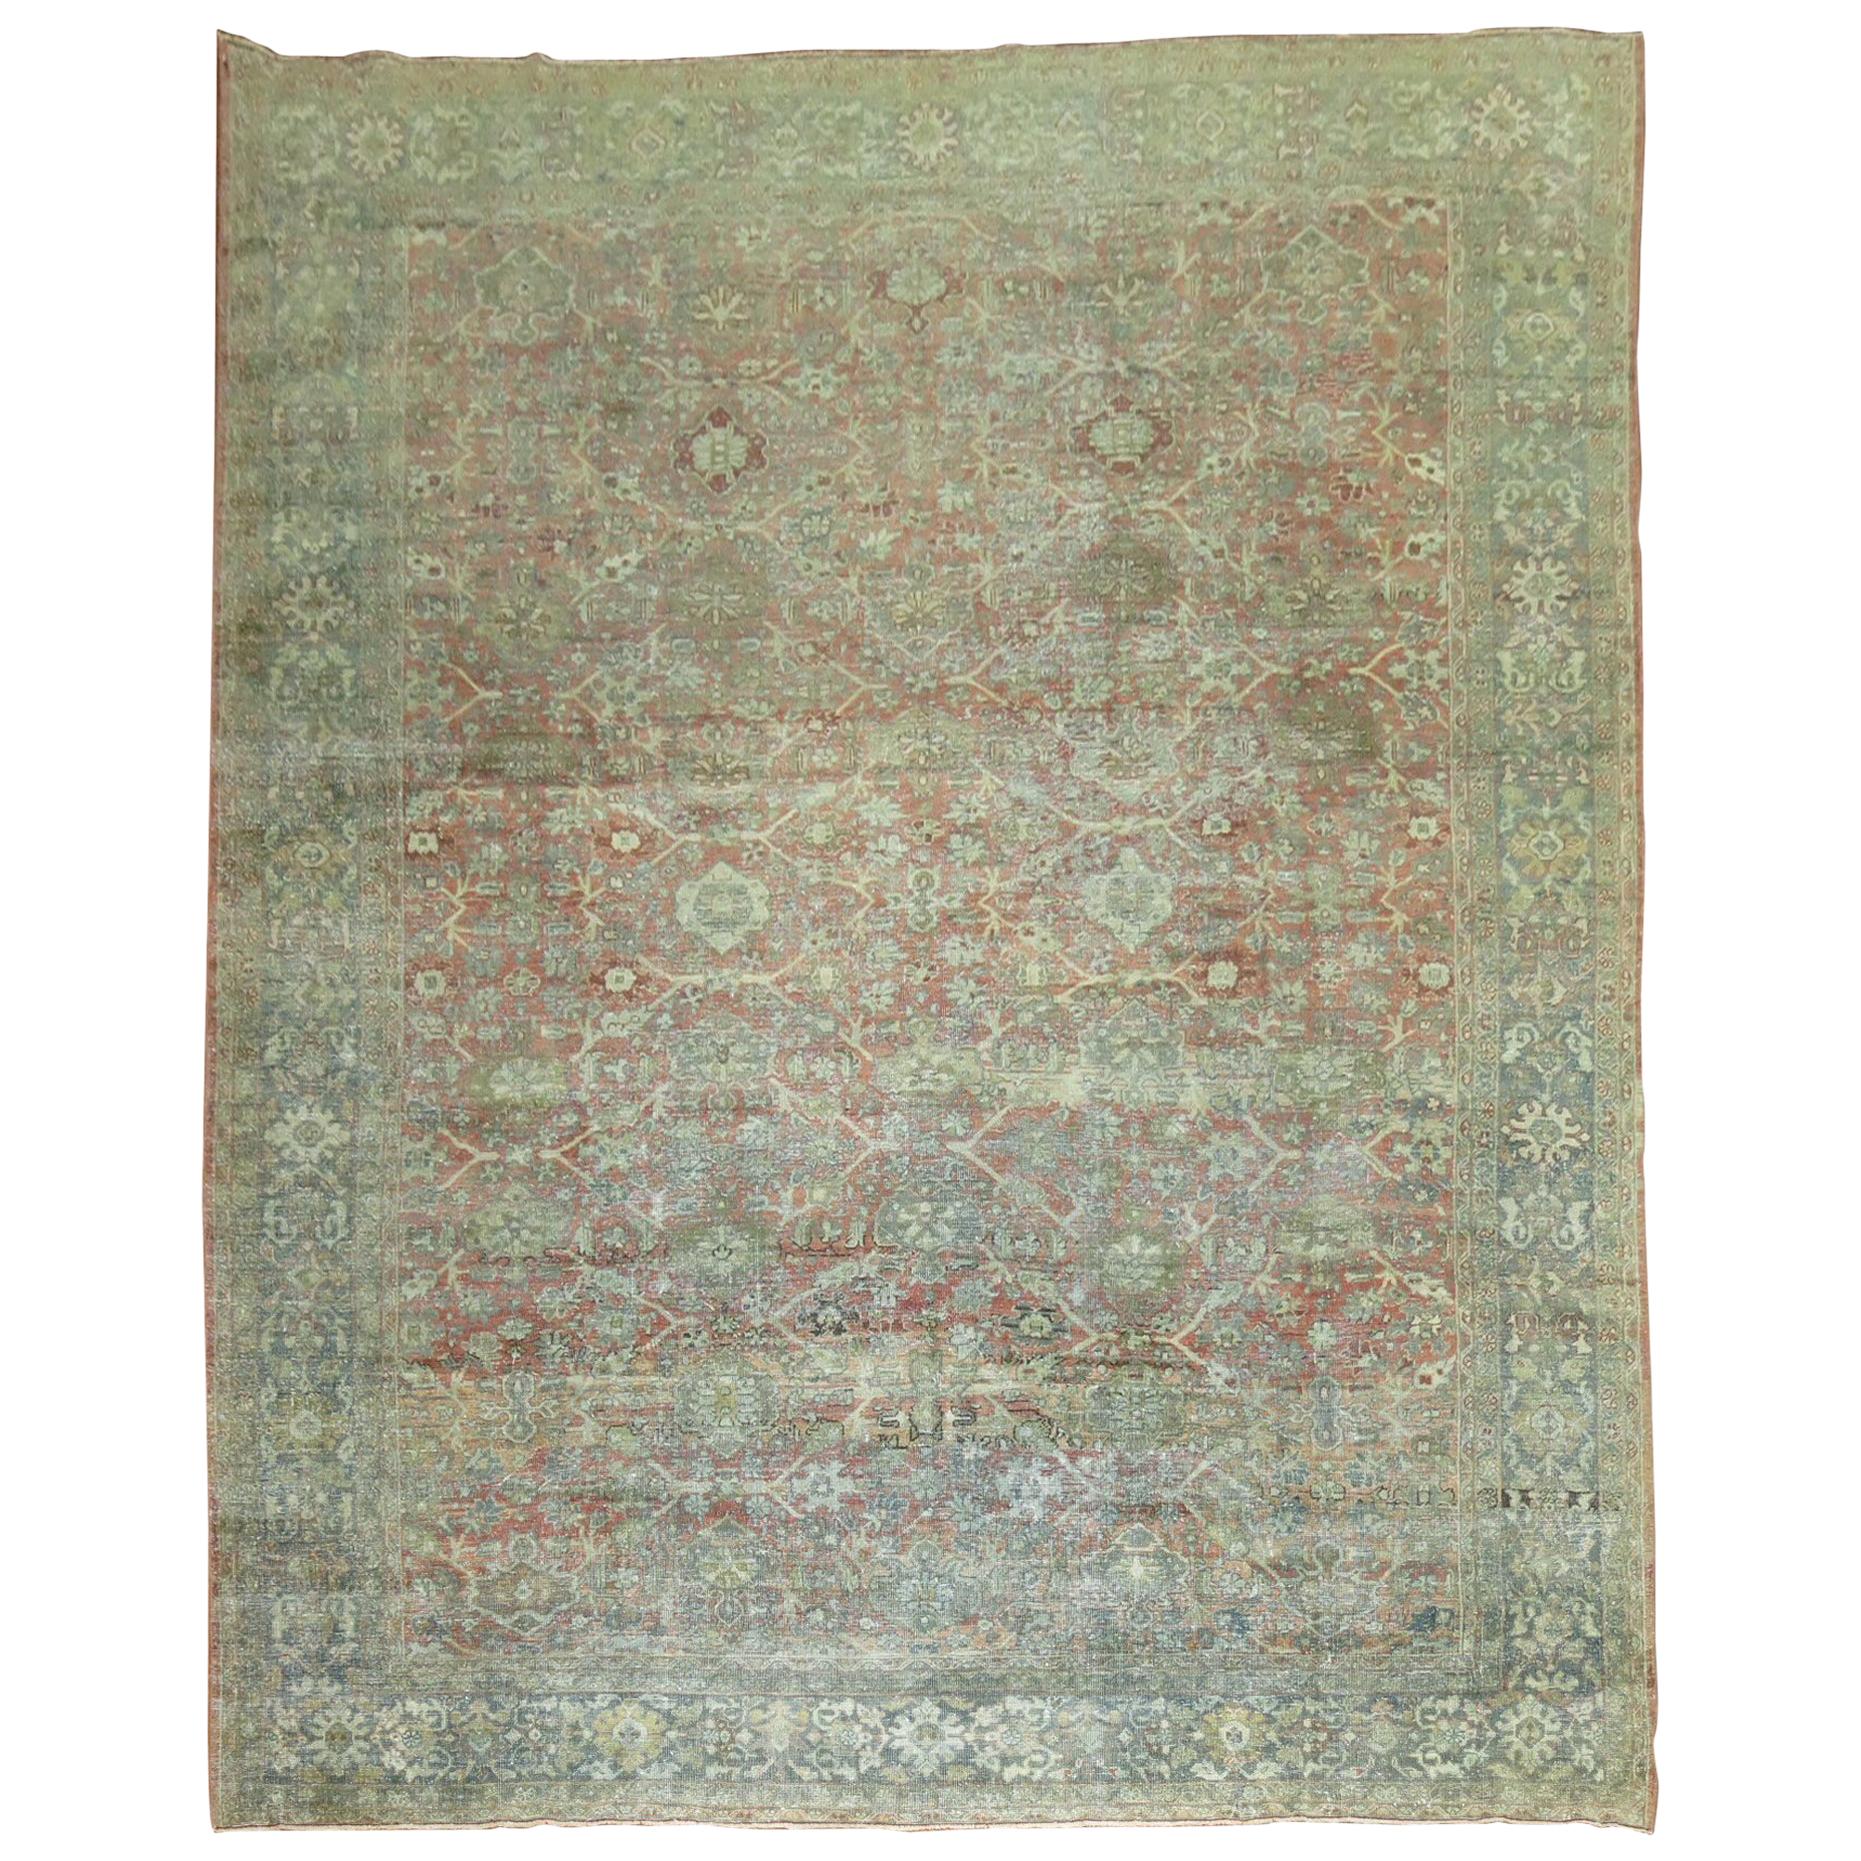 Shabby Chic Persian Traditional Mahal Rug In Terracotta and Sea Foam Tones